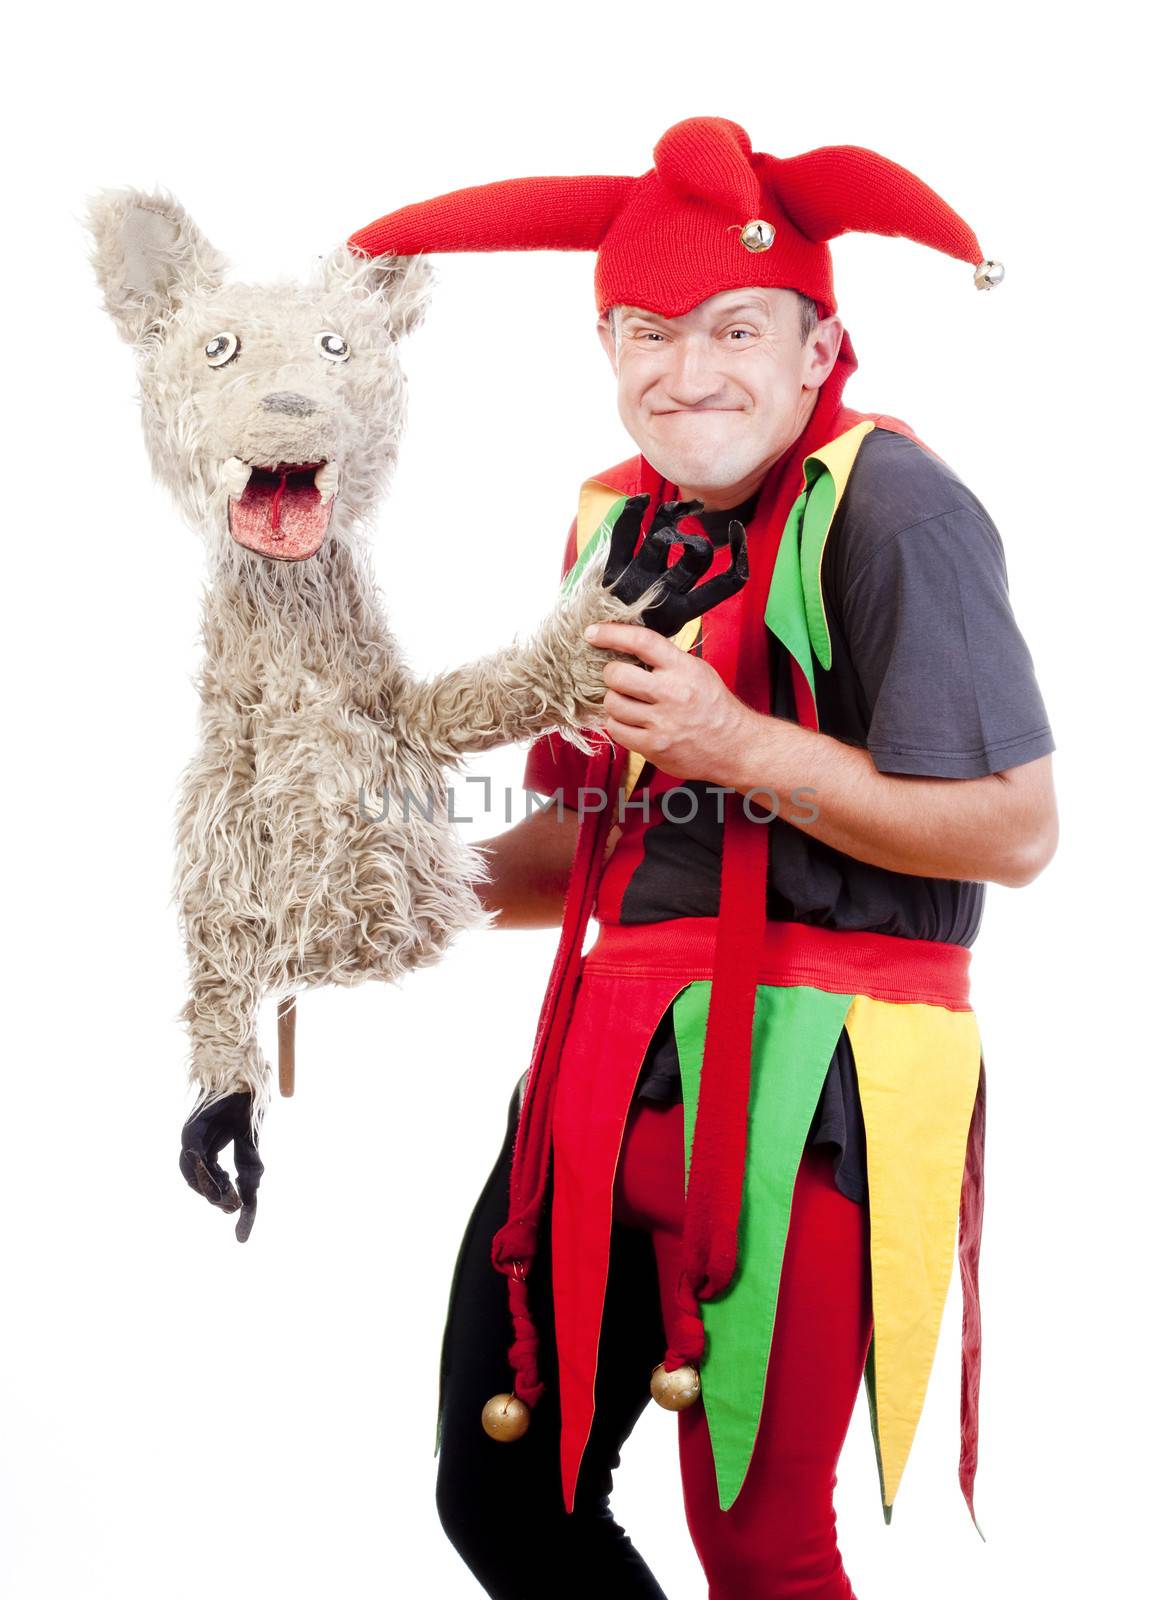 jester - entertaining figure in typical costume with puppet